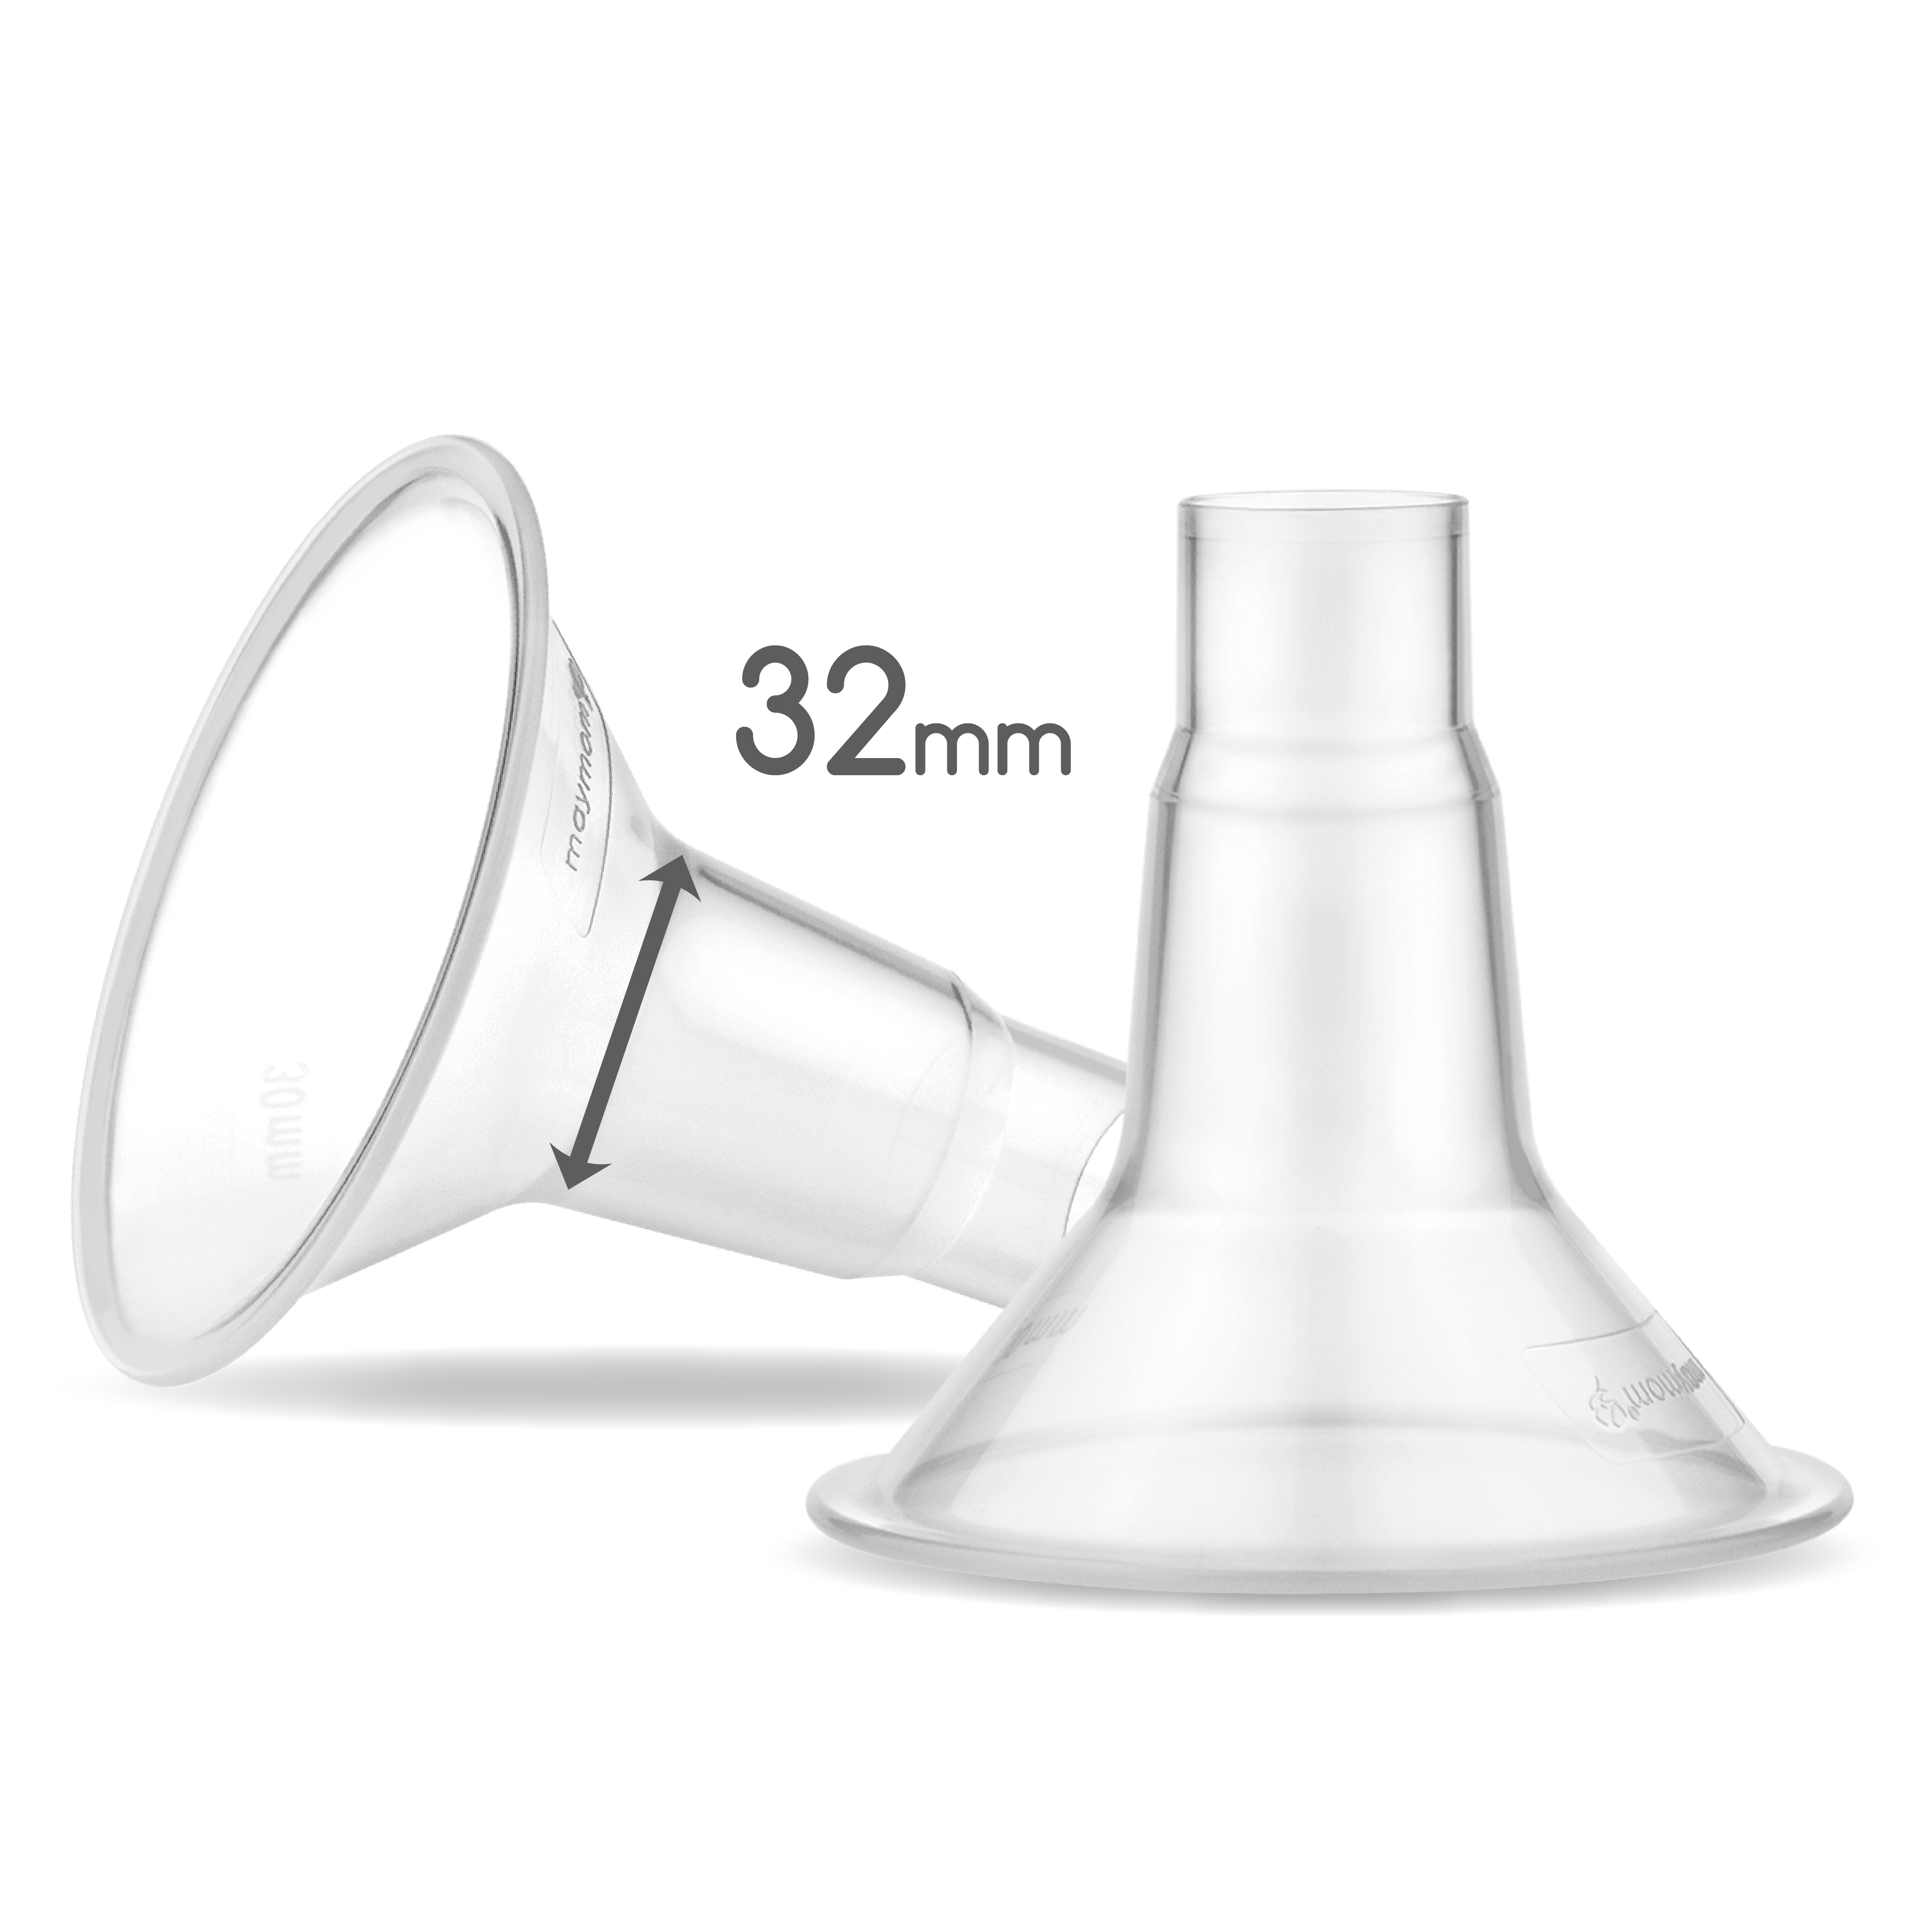 MyFit 32 mm Shield; Compatible with Medela Breast Pumps Having PersonalFit, Freestyle, Harmony, Maxi Connector; Connects; 2pc